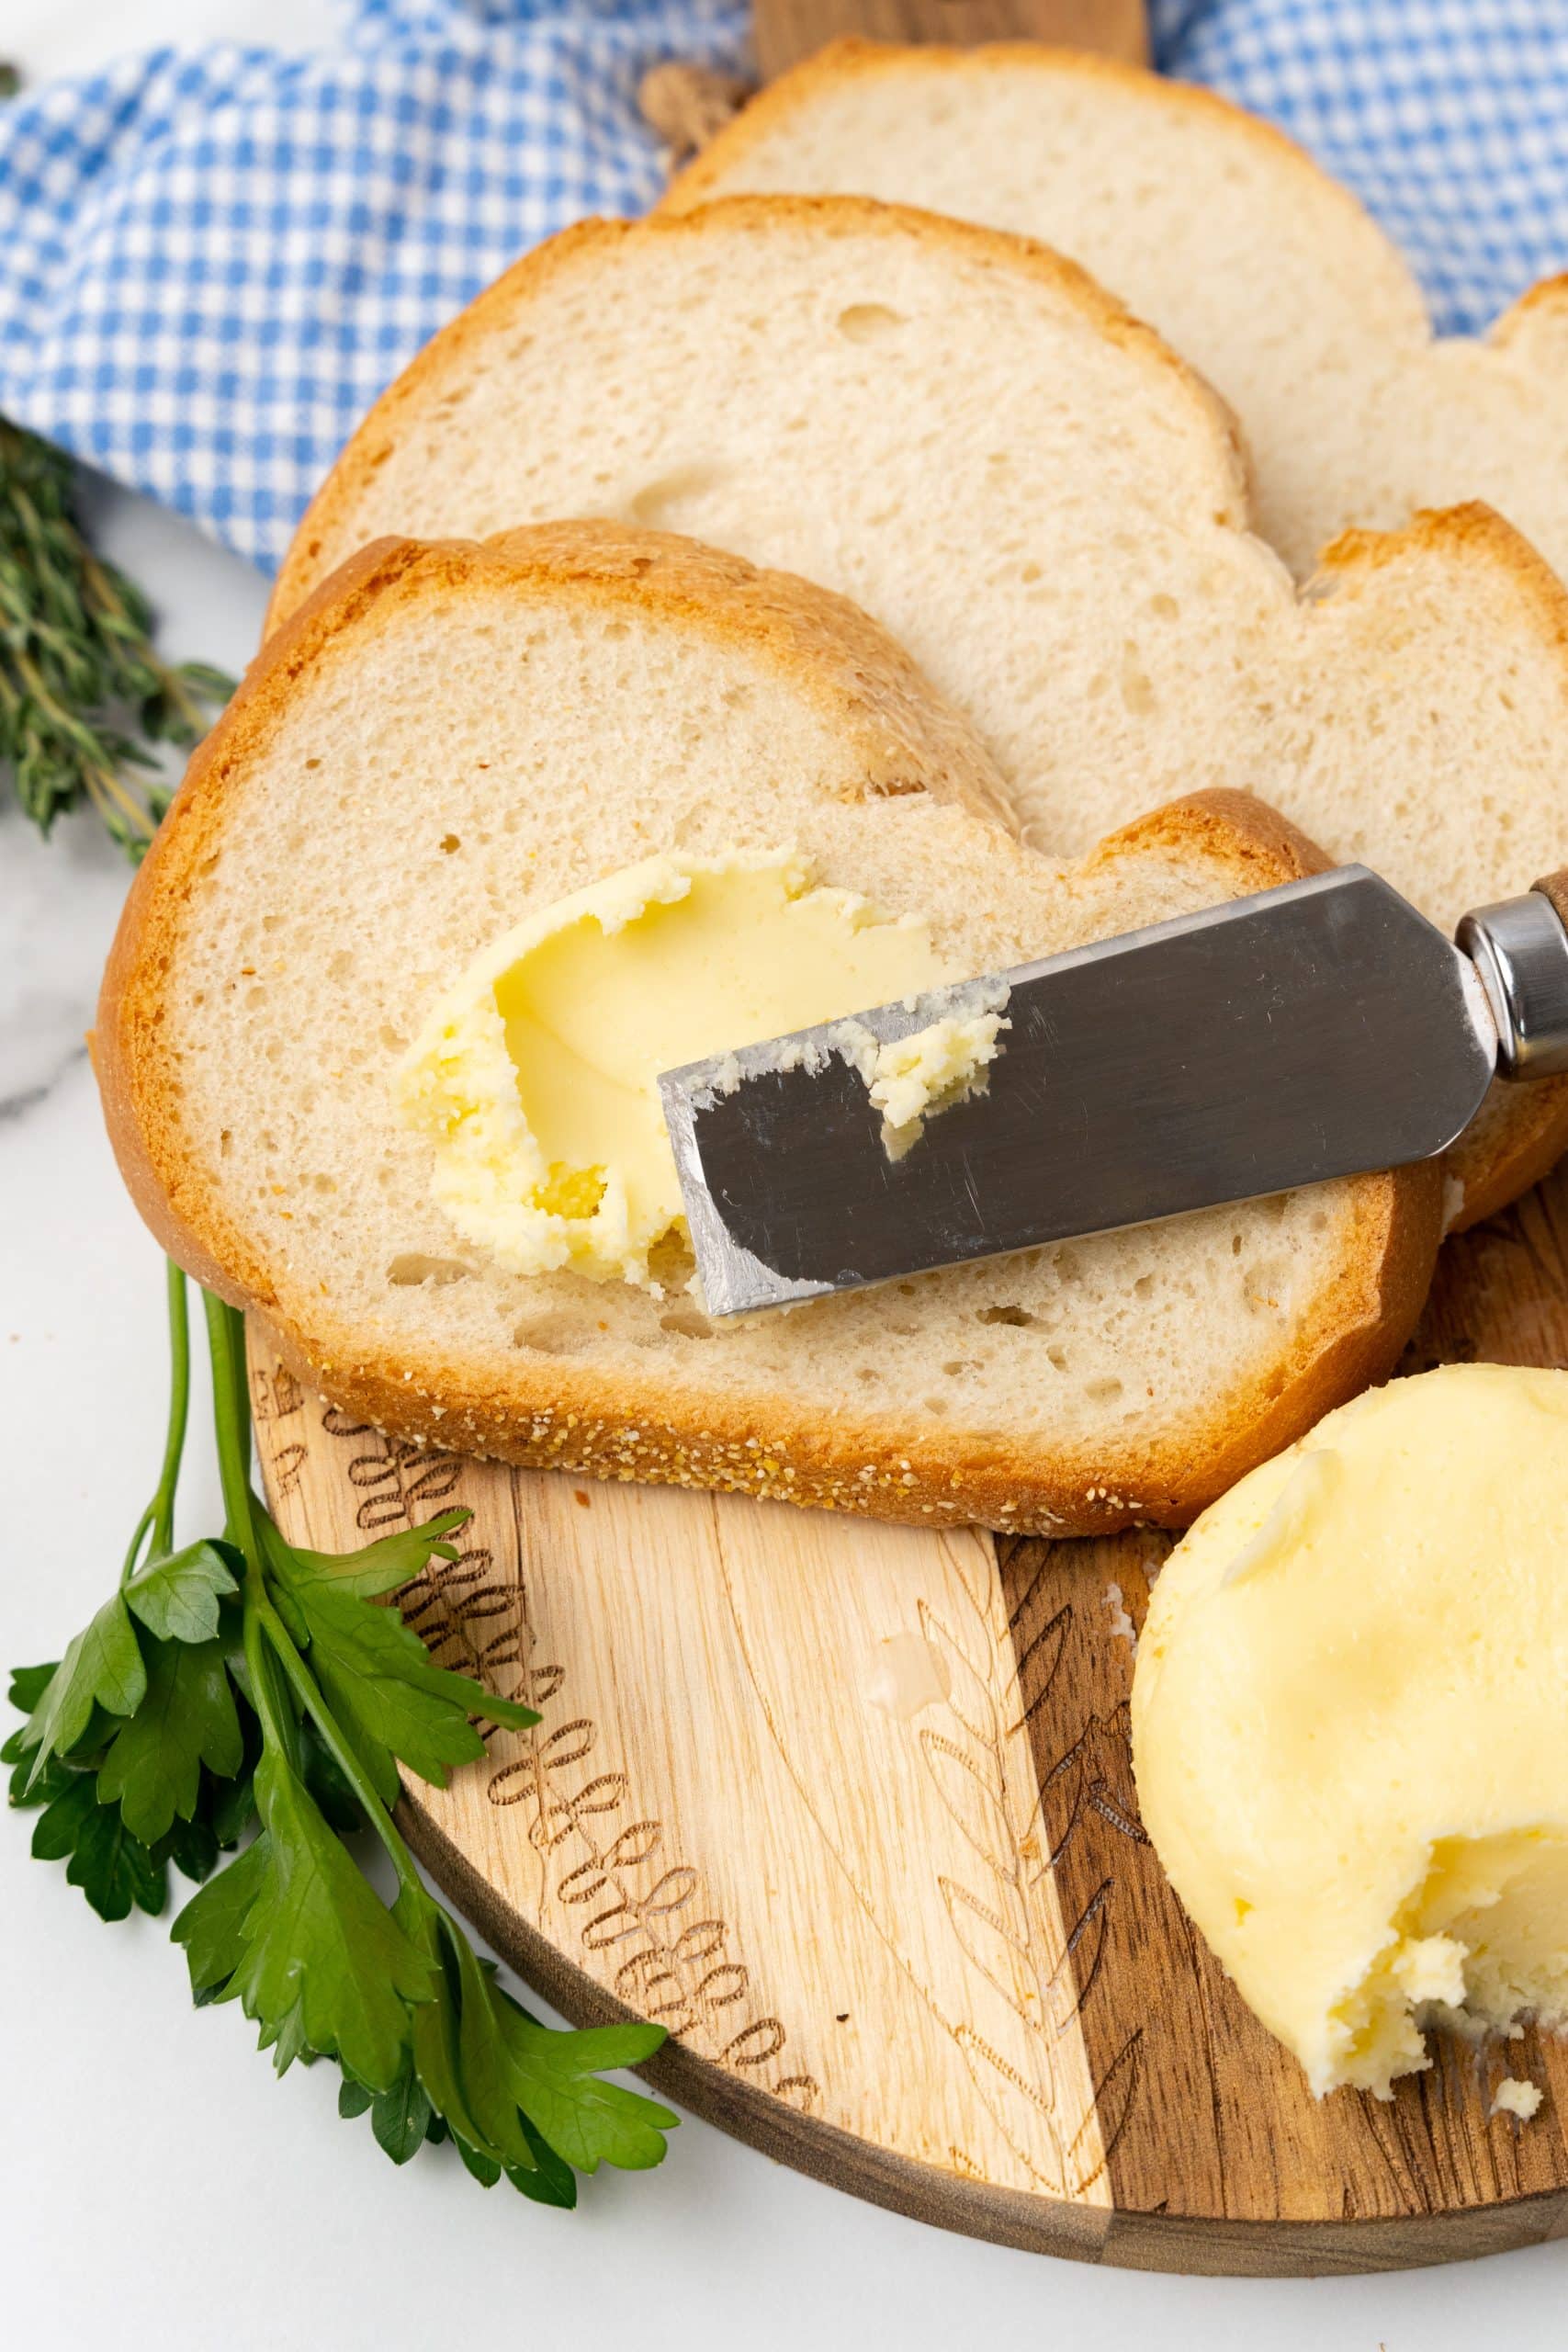 fresh homemade butter being spread on a soft slice of white bread